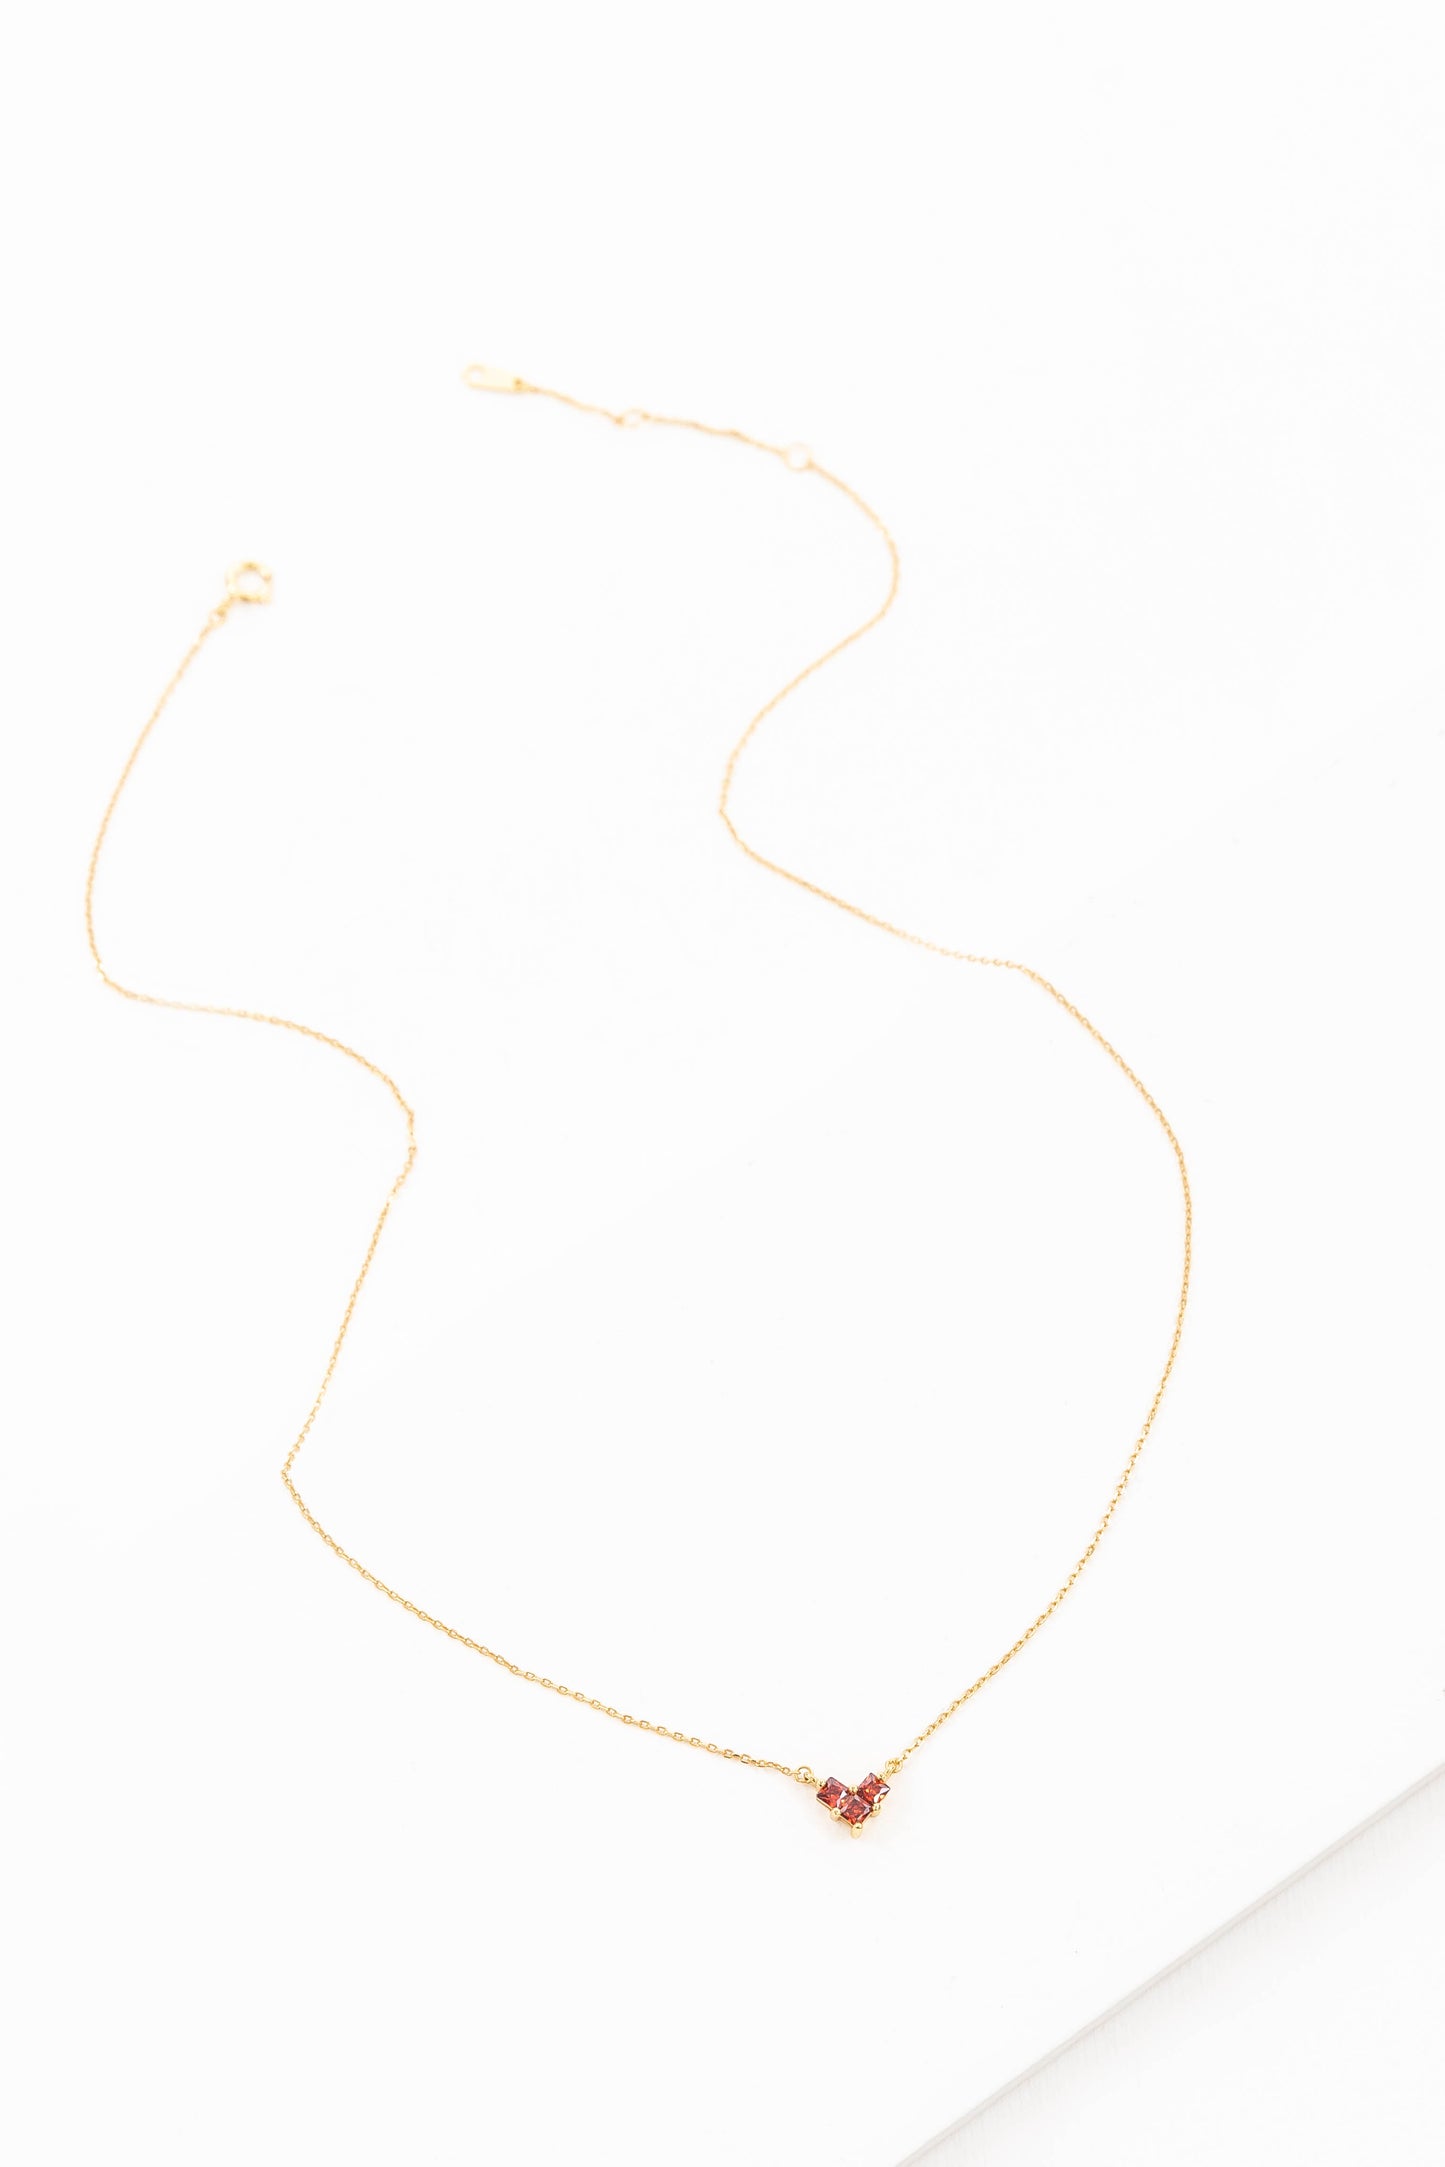 All My Love Necklace (14K)